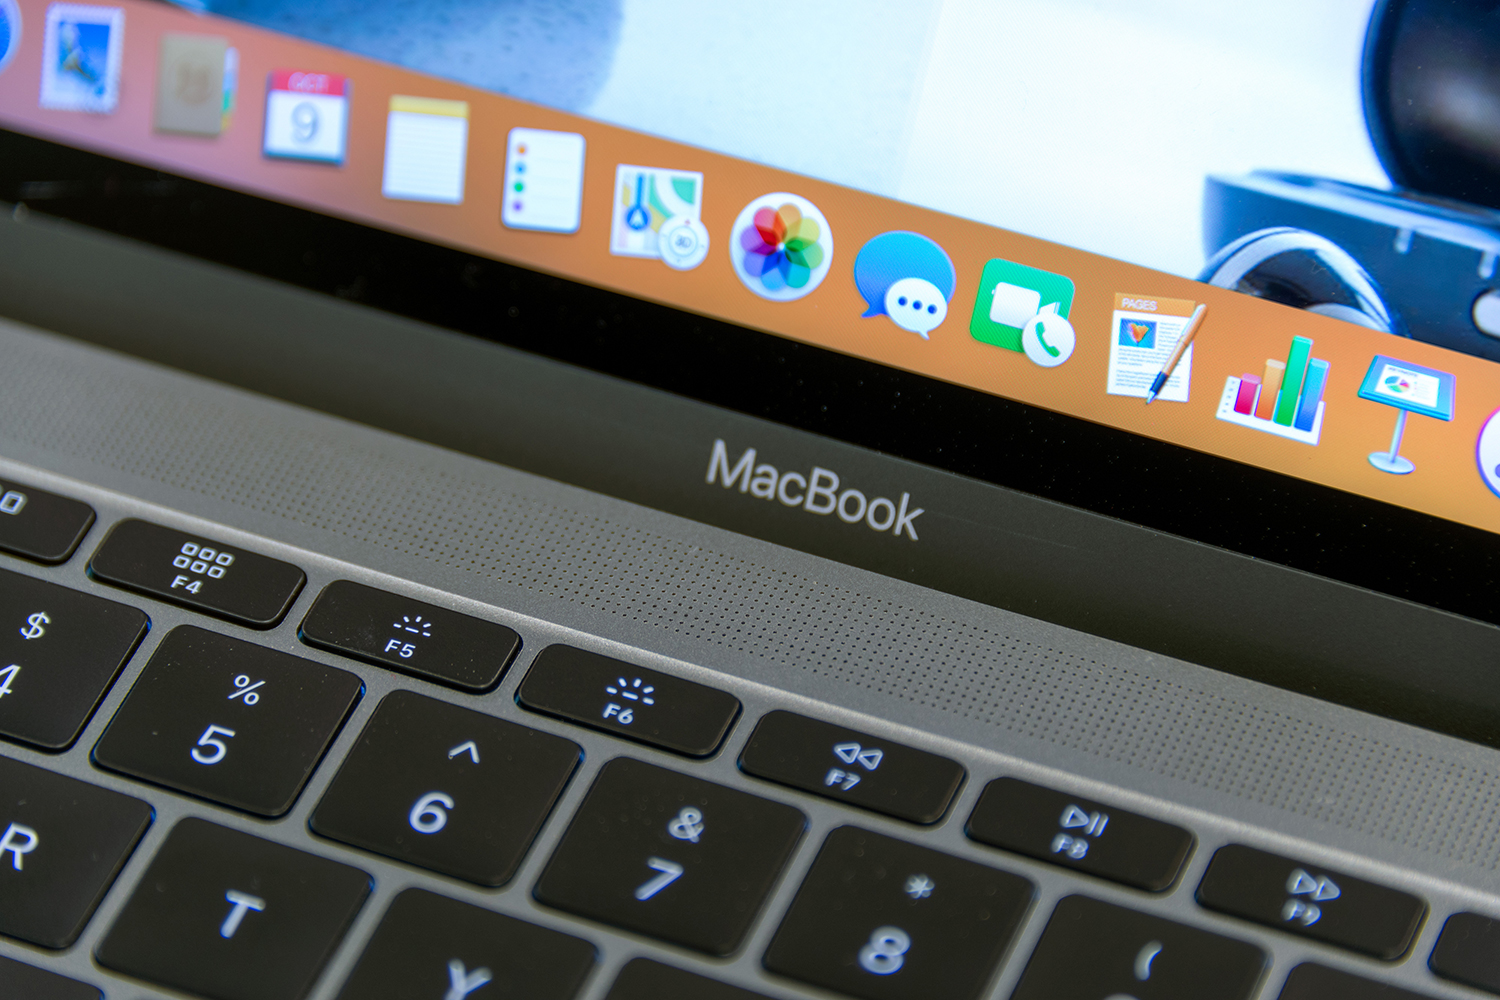 Apple Macbook M3 launch reportedly delayed: Expected release date